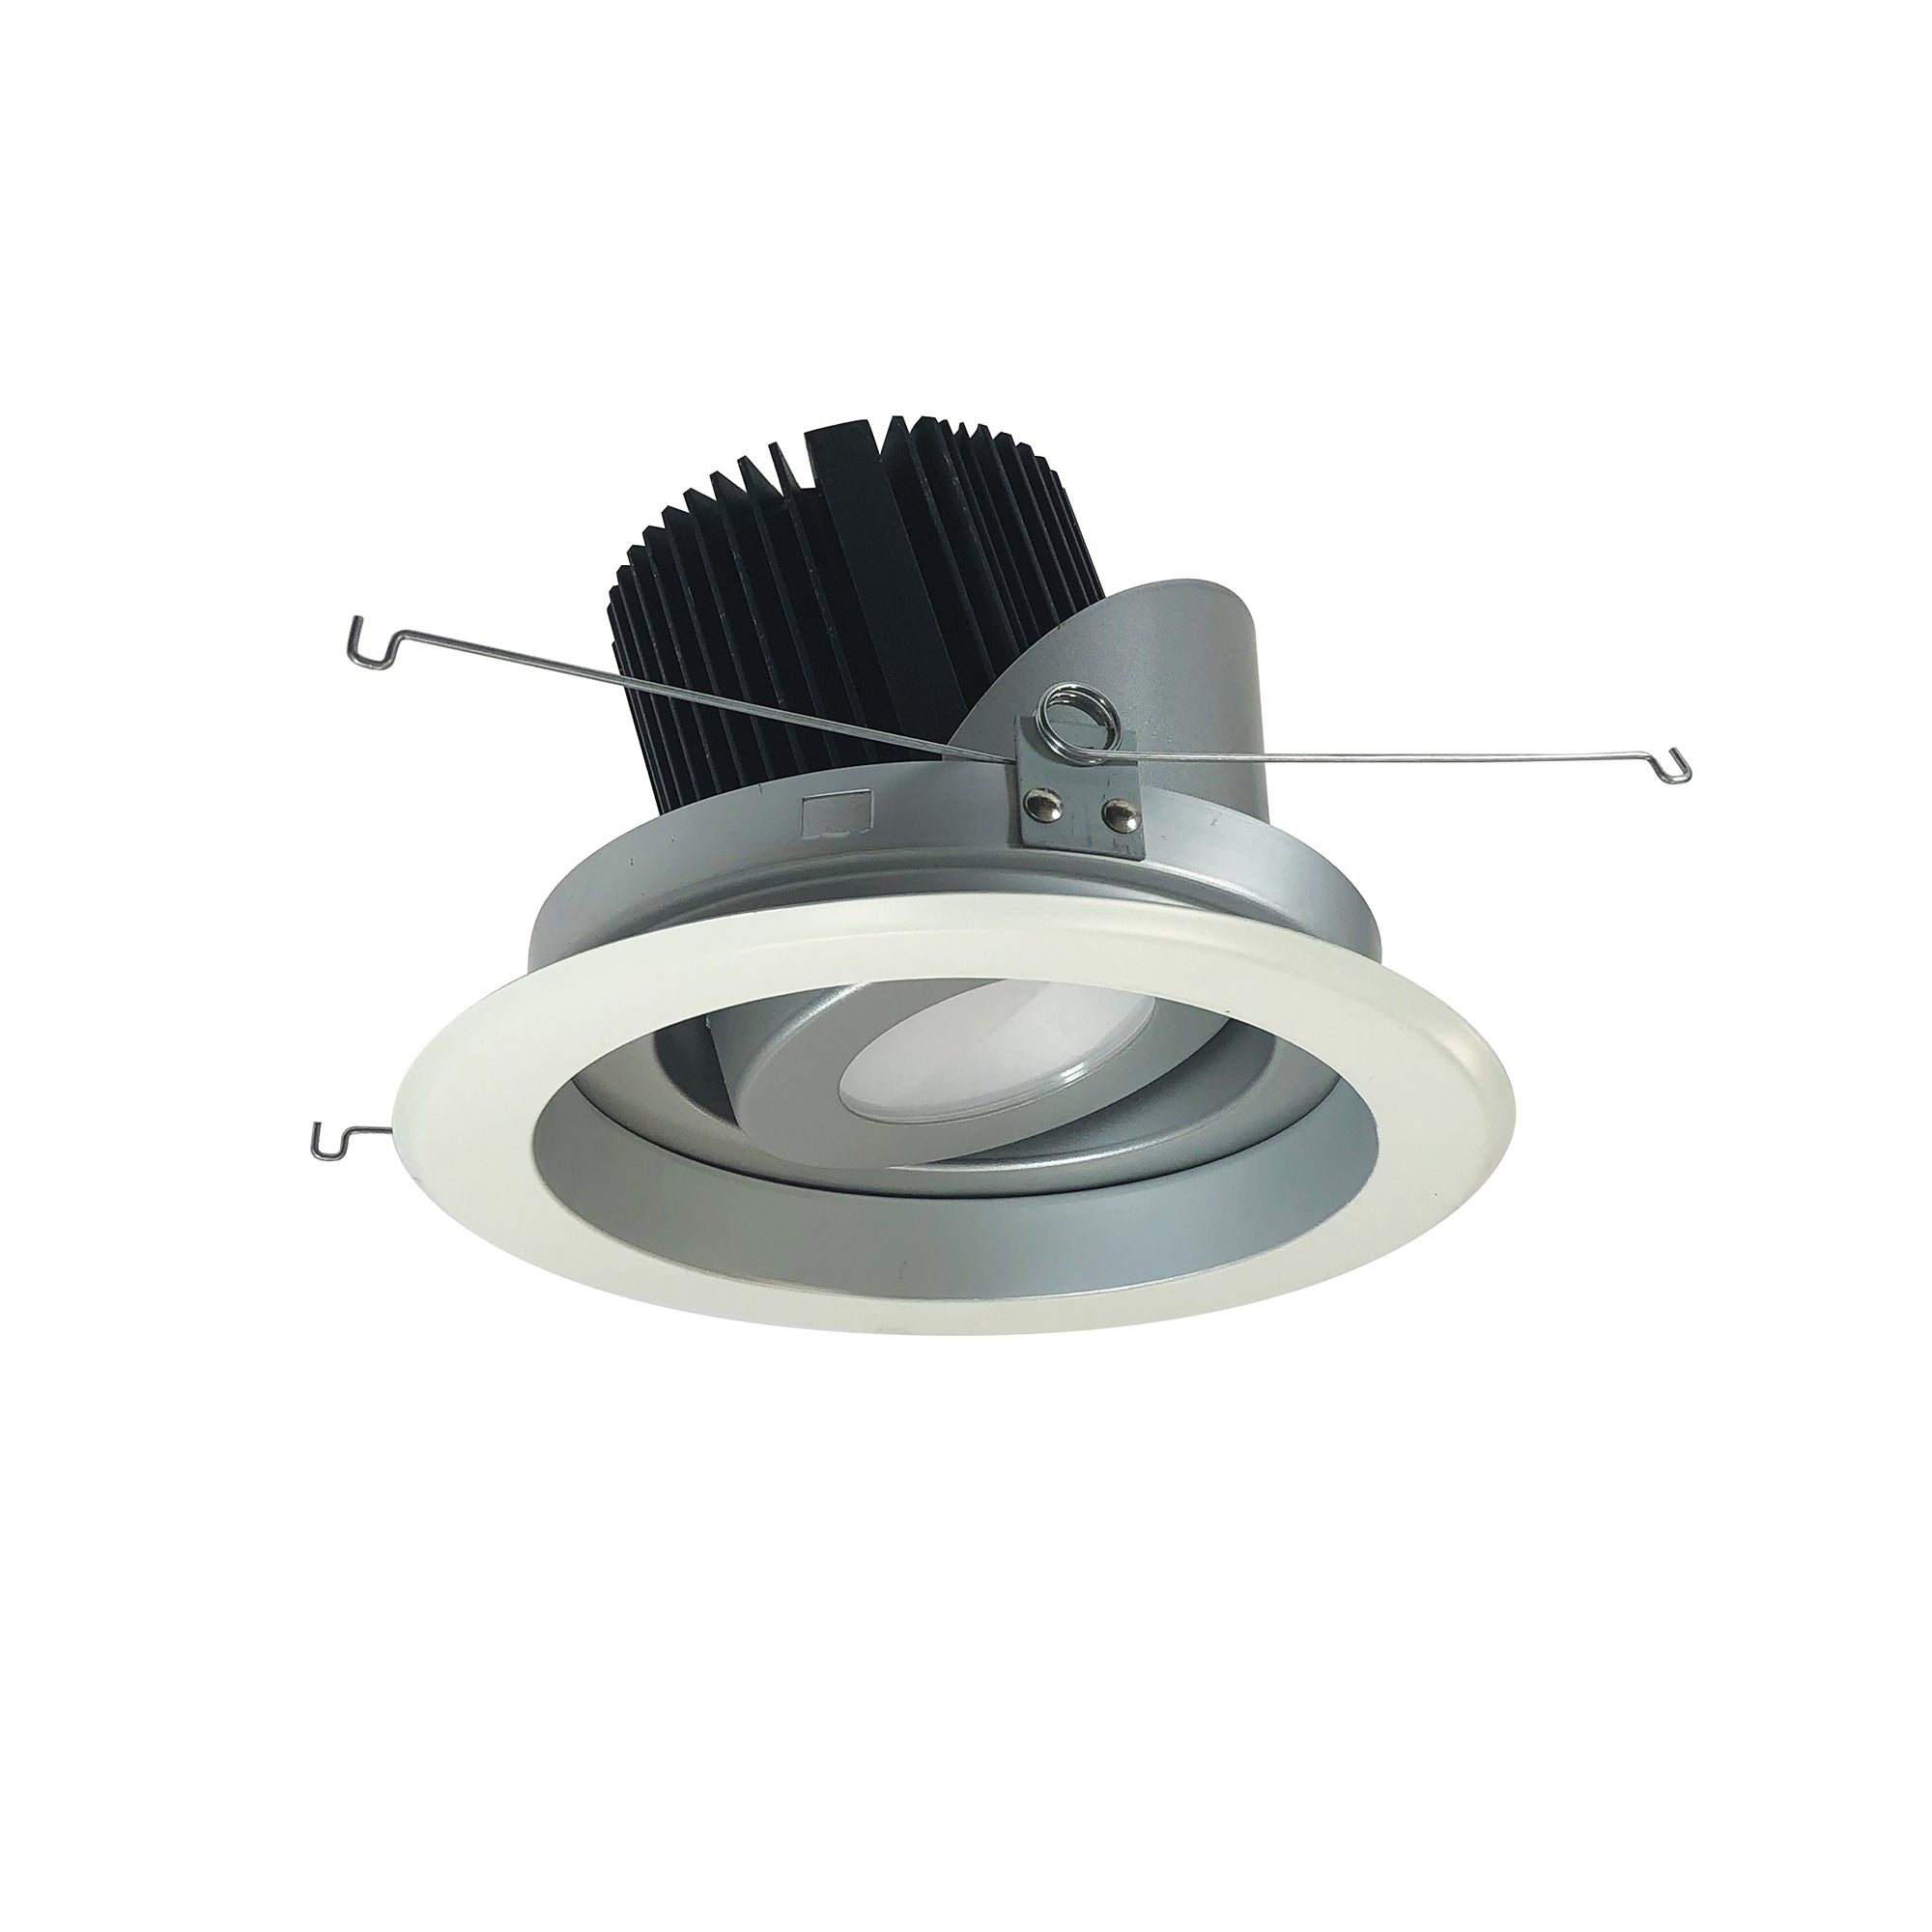 Nora Lighting NRM2-619L2527MHZW - Recessed - 6 Inch Marquise II Round Regressed Adj. Reflector, Medium Flood, 2500lm, 2700K, Haze/White (Not Compatible with NHRM2-625 Housings)